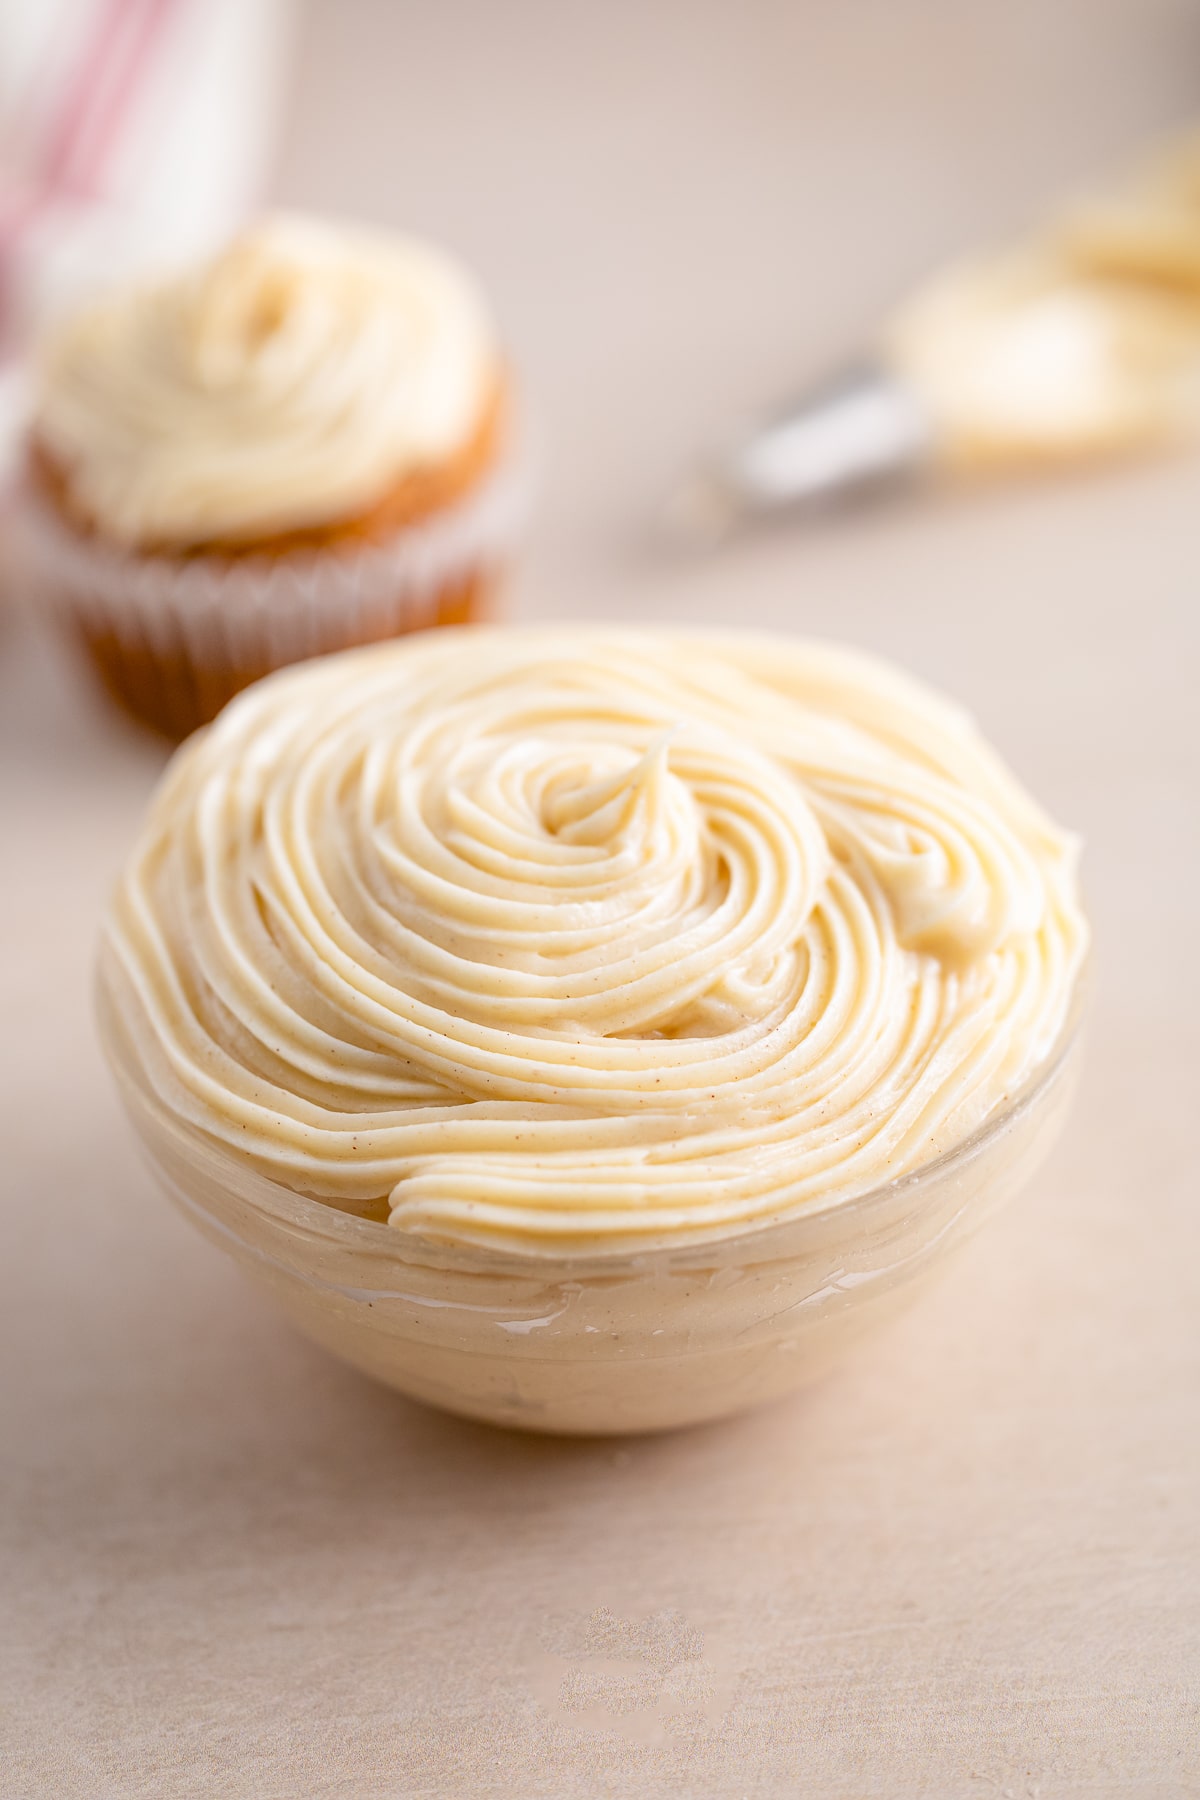 cinnamon cream cheese frosting in a small glass bowl